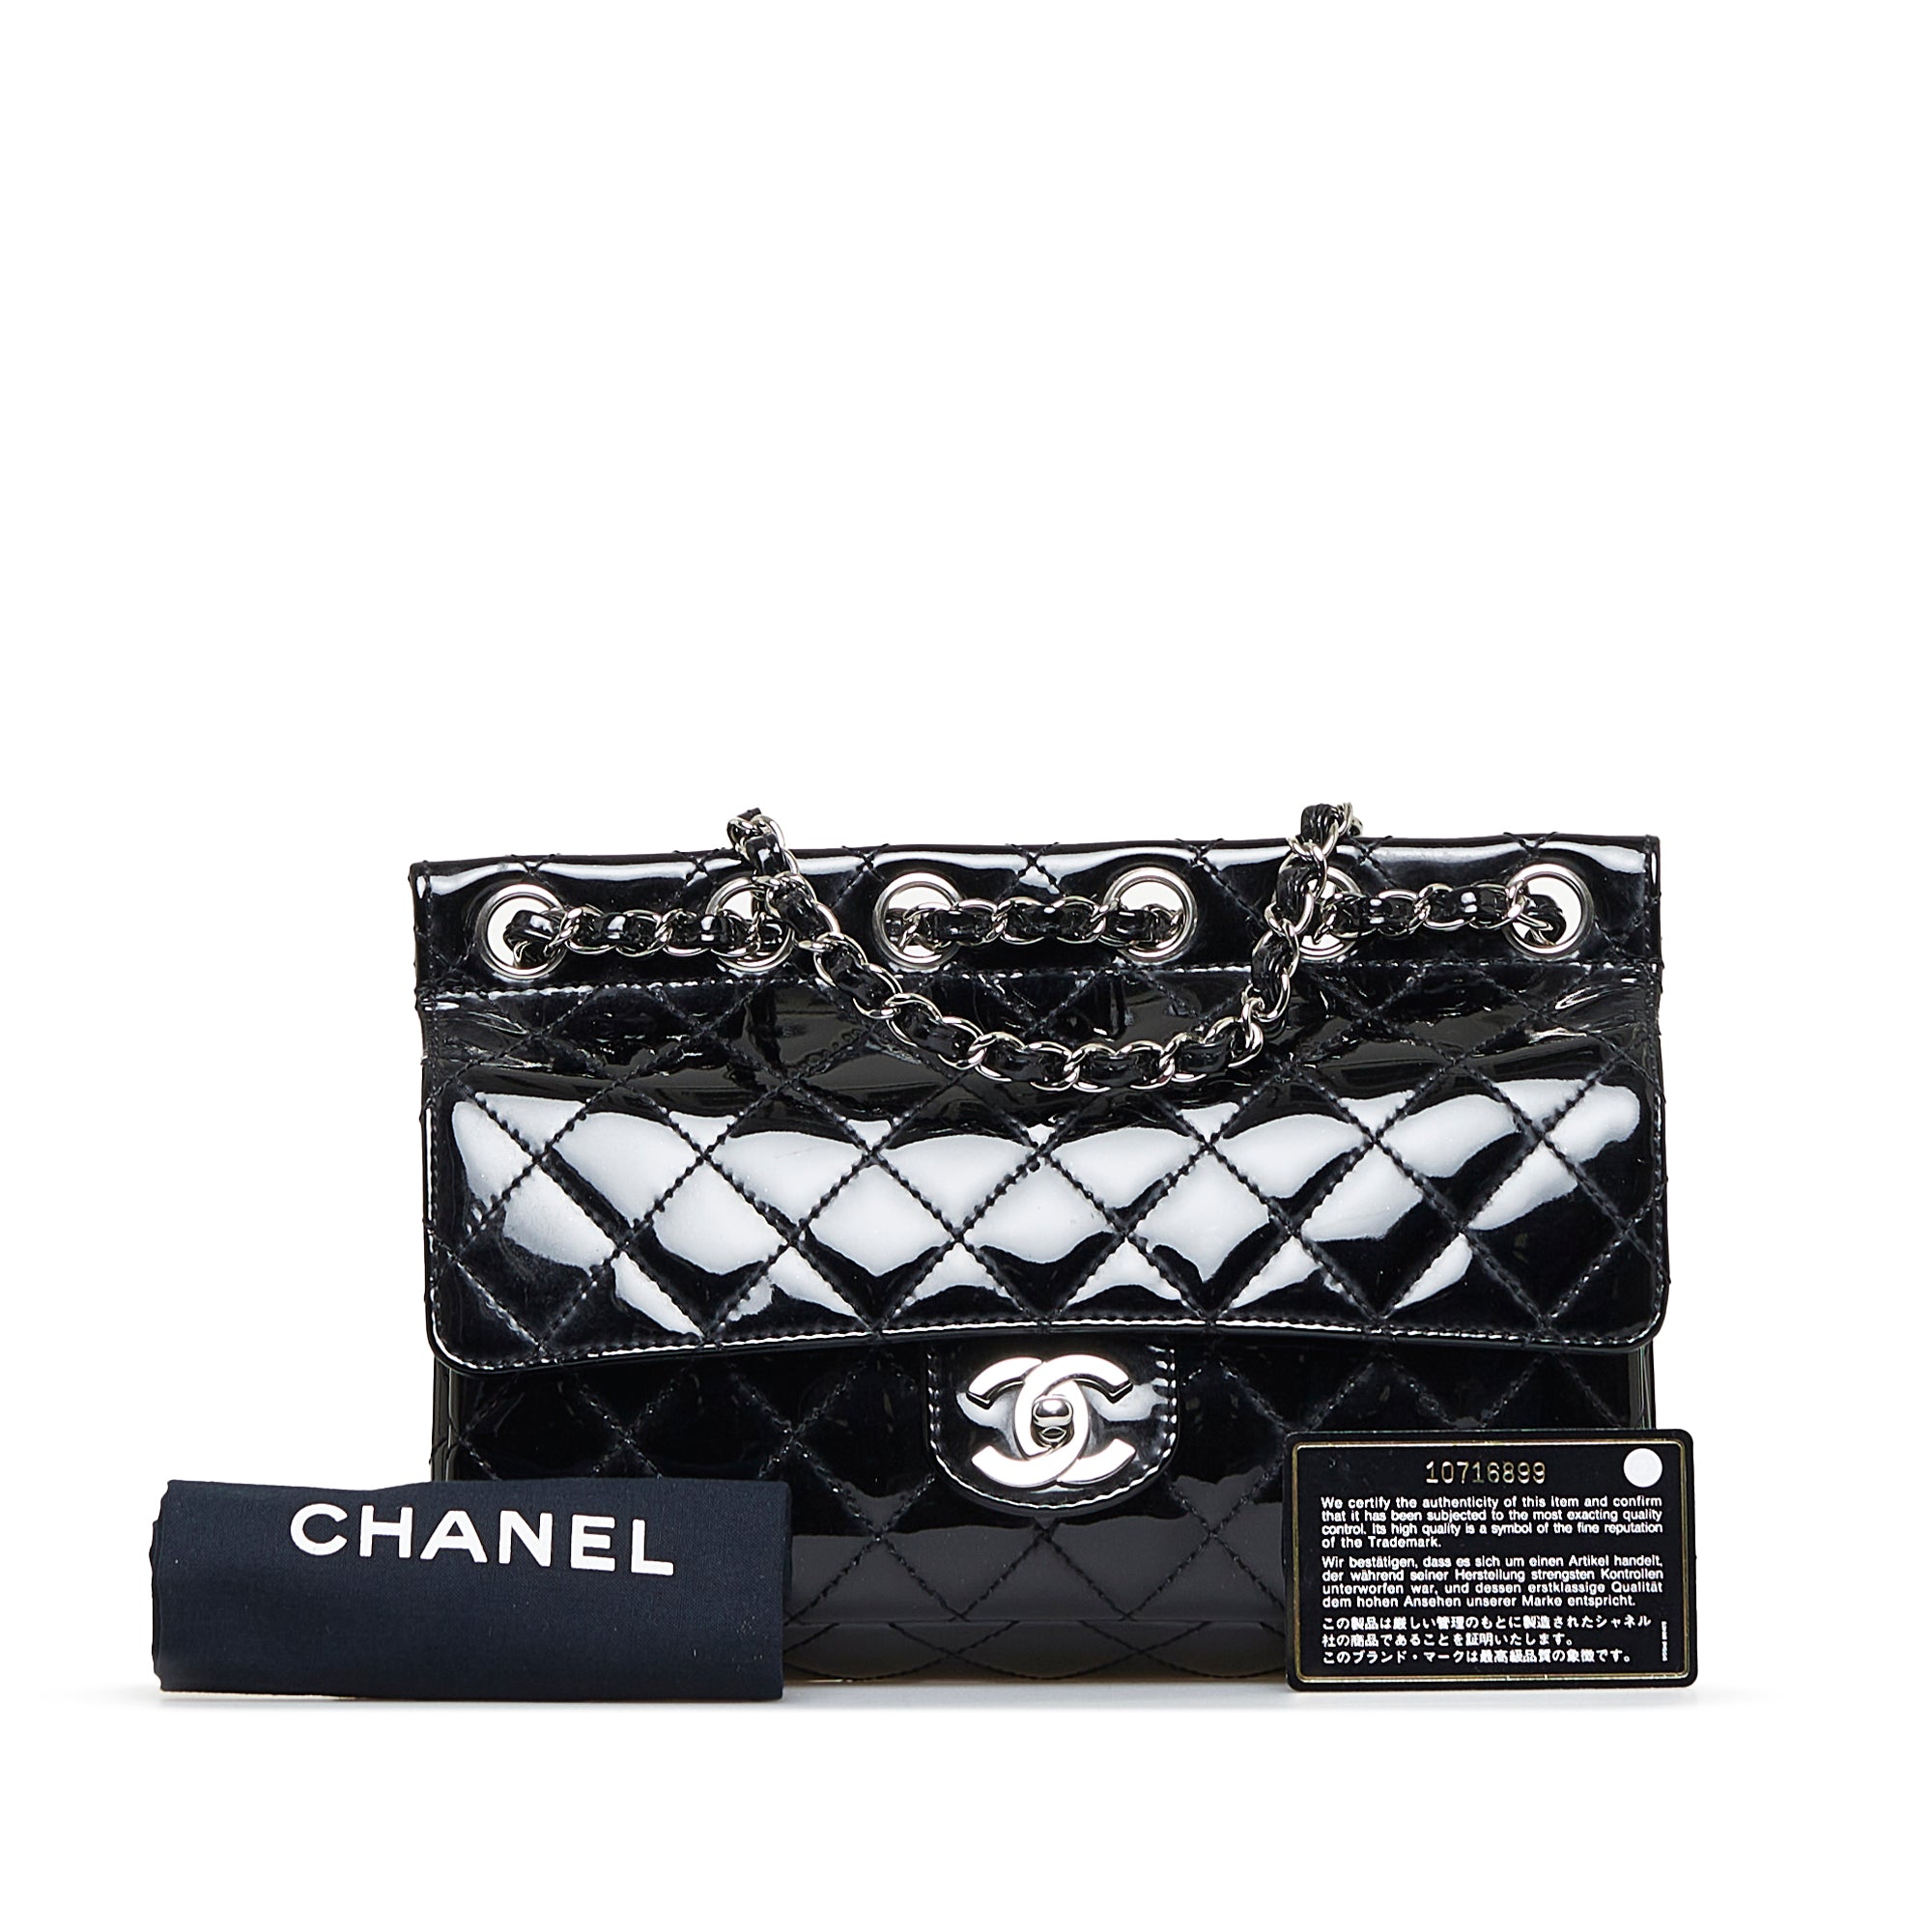 CHANEL Patent Leather In The Business Flap Bag